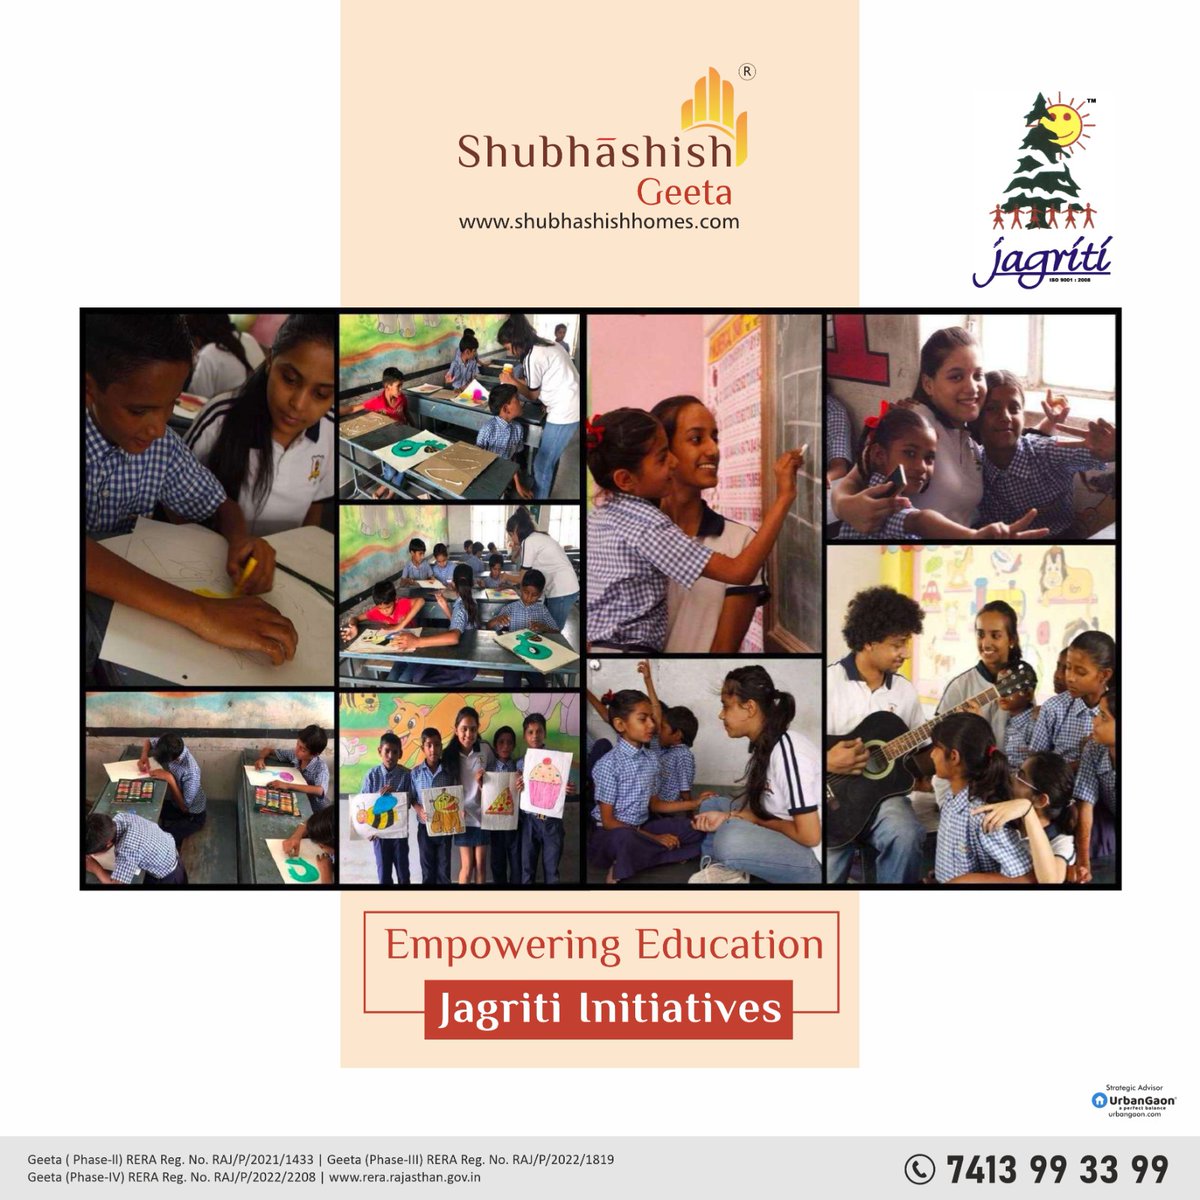 Empowering education through Jagriti Initiatives! Lighting up pathways to knowledge and brighter futures for all.

#EmpoweringEducationTrust #LearningNeverStops #EducationalForAll #education #learning #school #motivation #students #knowledge #teacher #children #Shubhashishhomes